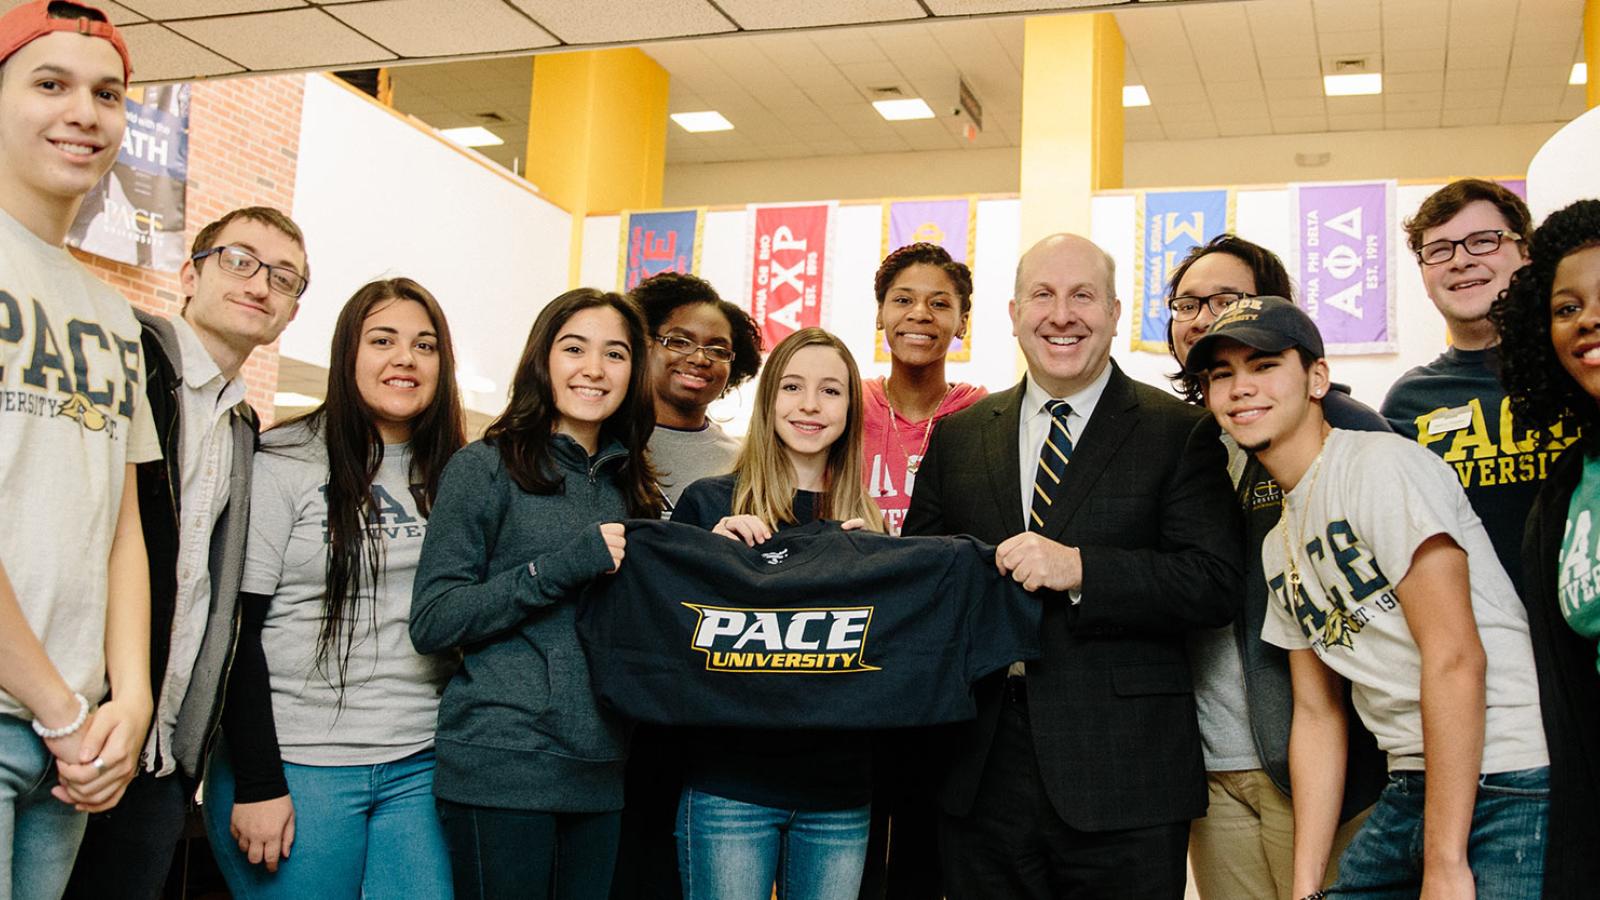 Pace University President, Marvin Krislov with students in the Kessel Student center